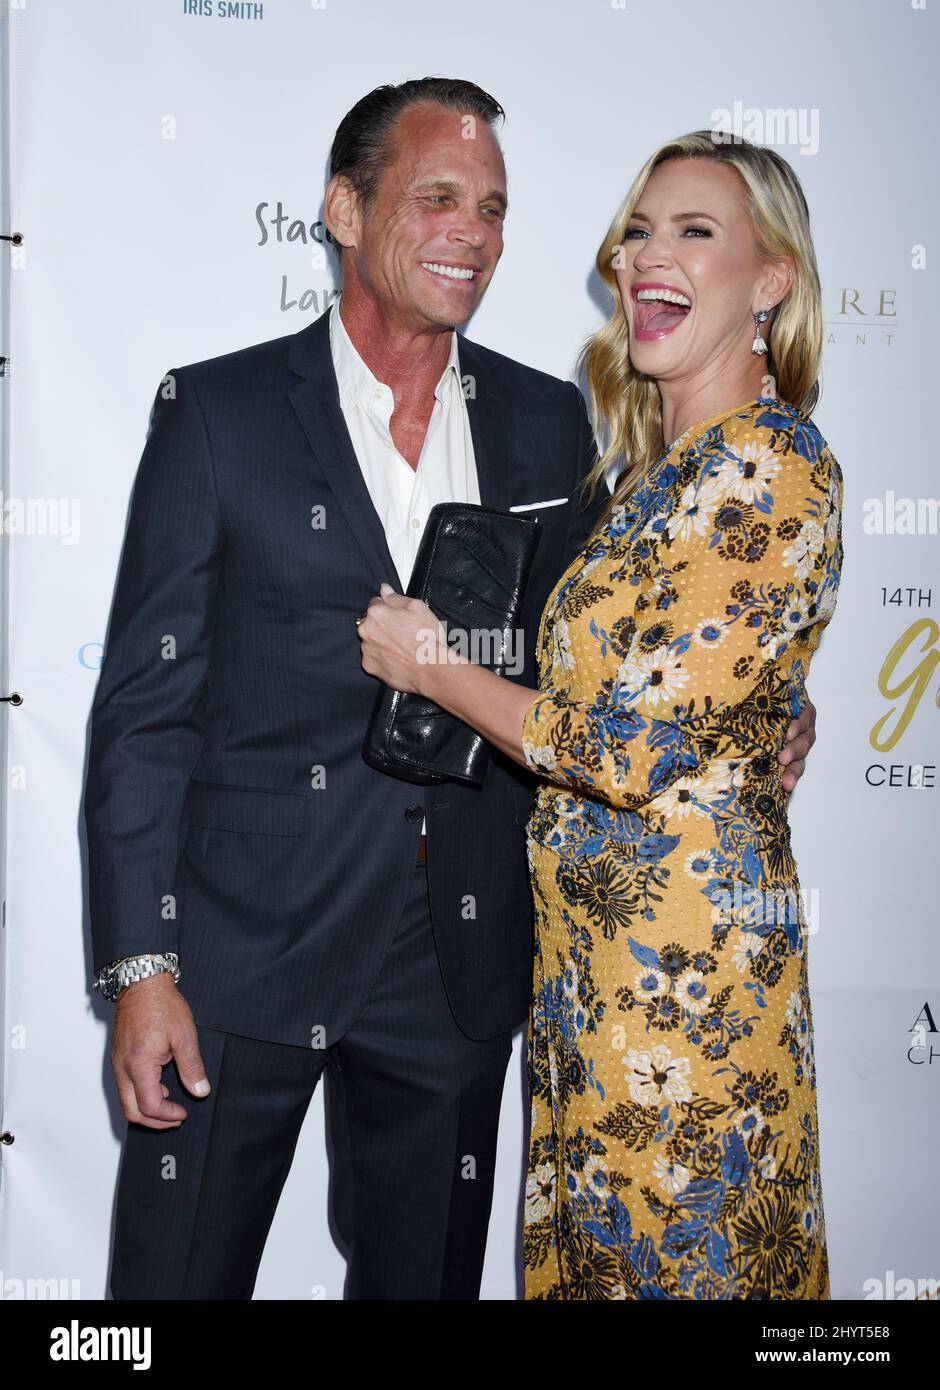 Natasha Henstridge and Chris Browning at the George Lopez Foundation14th Annual Celebrity Golf Classic Pre-Party held at Baltaire Restaurant on October 3, 2021 in Brentwood, CA. Stock Photo